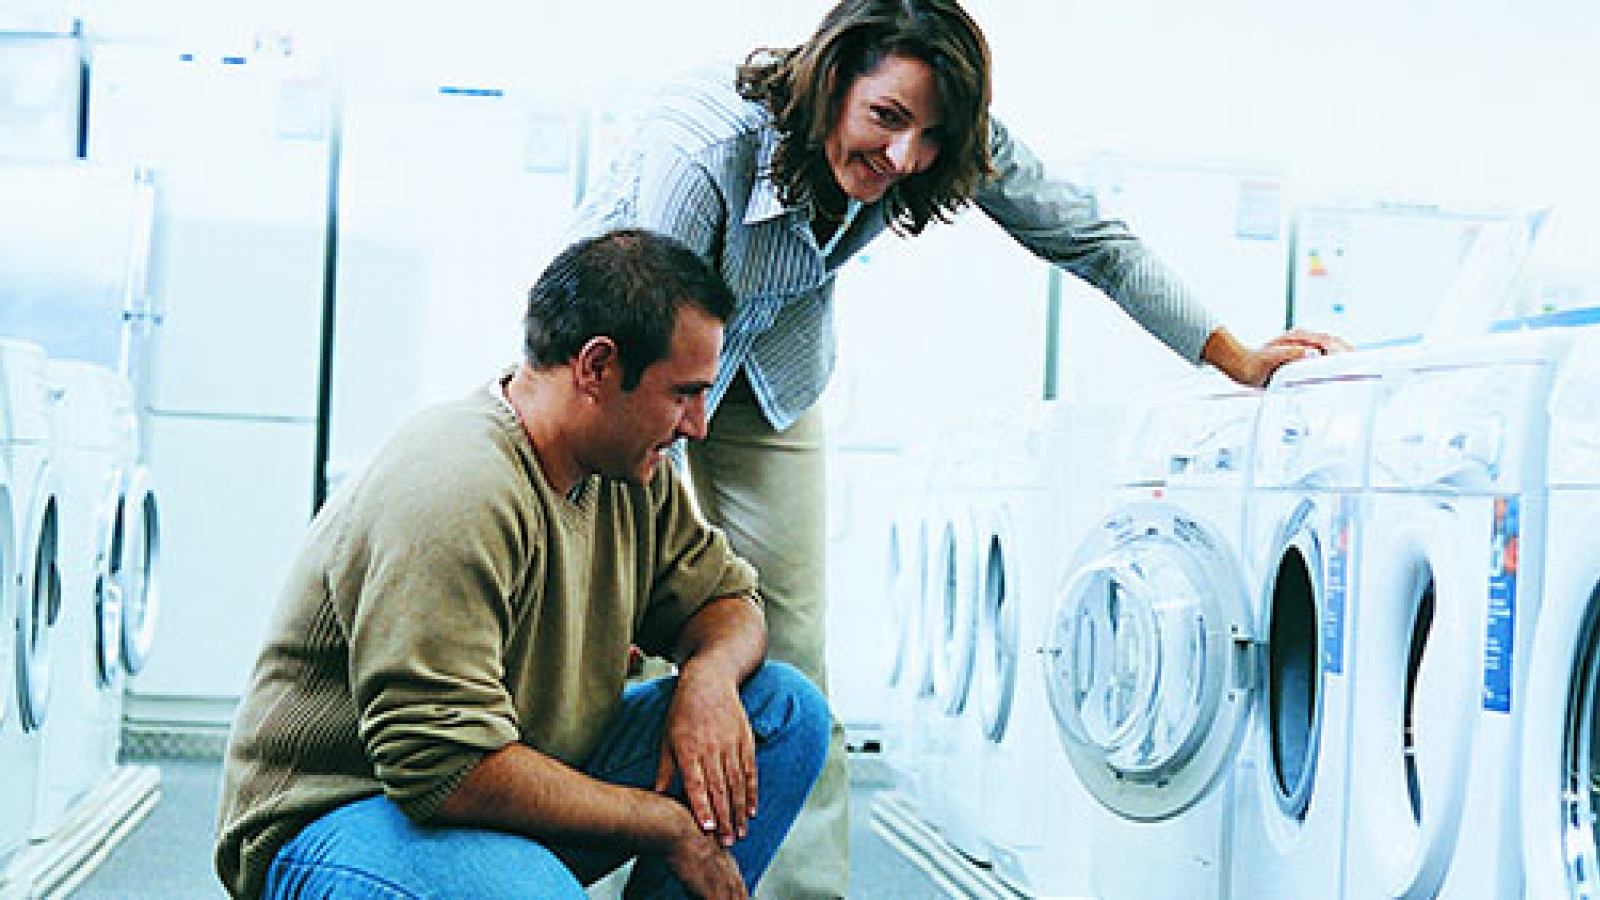 Couple looking at clothes washer in appliance store